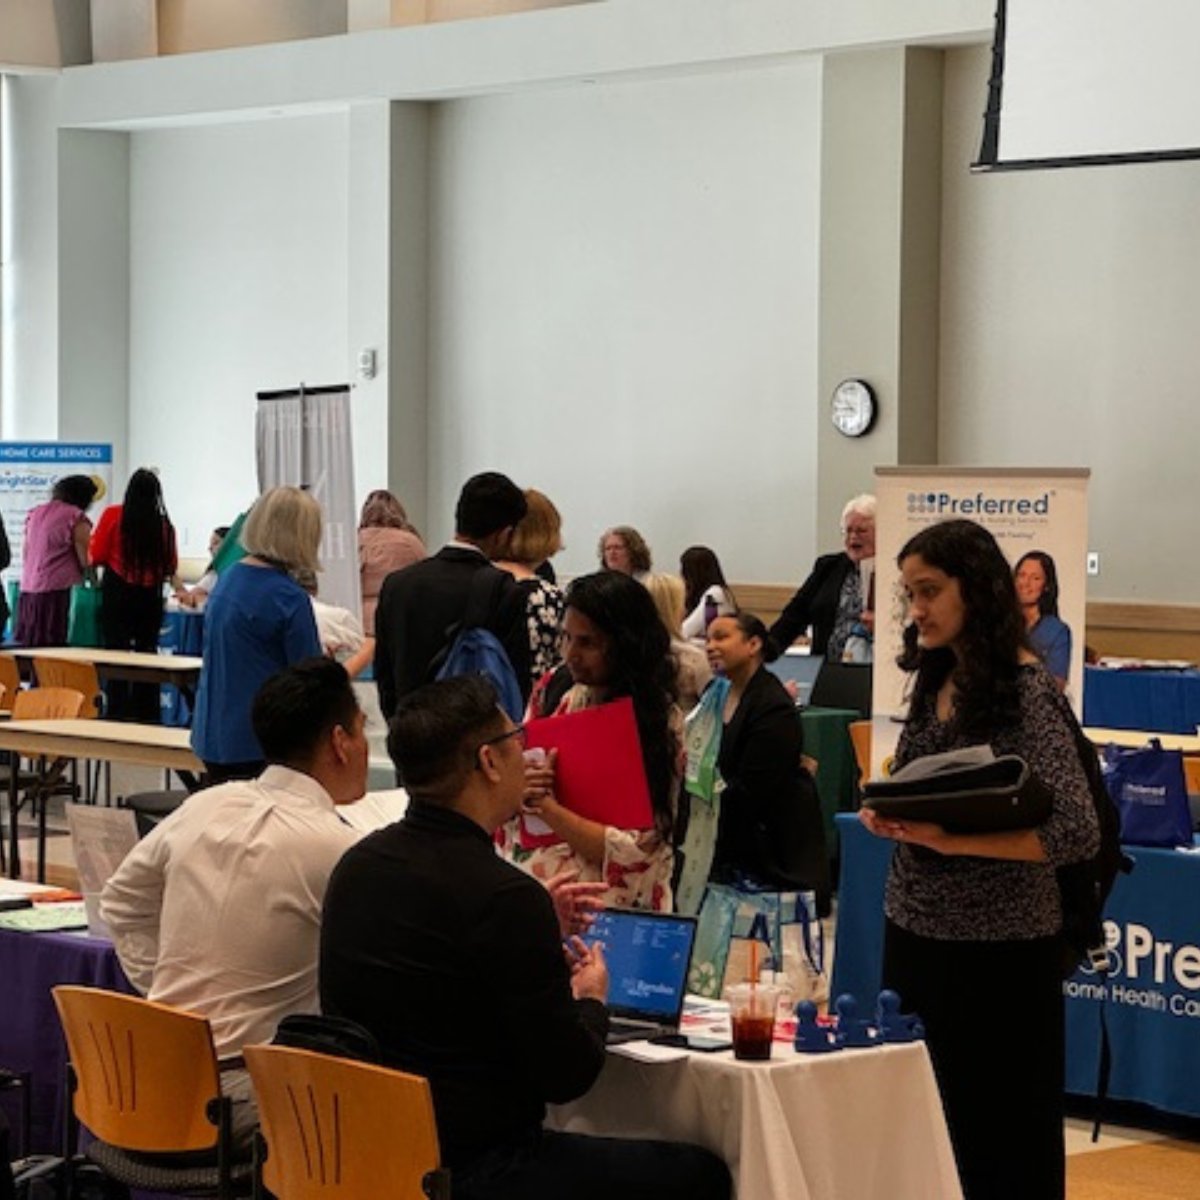 Our Healthcare Hero #HiringEvent was a hit, bringing together top #healthcare talent & #job opportunities. Missed it? Don't worry, the next one for TDL & Advanced Manufacturing is on 7/18. Stay tuned for updates! #JobSeekers